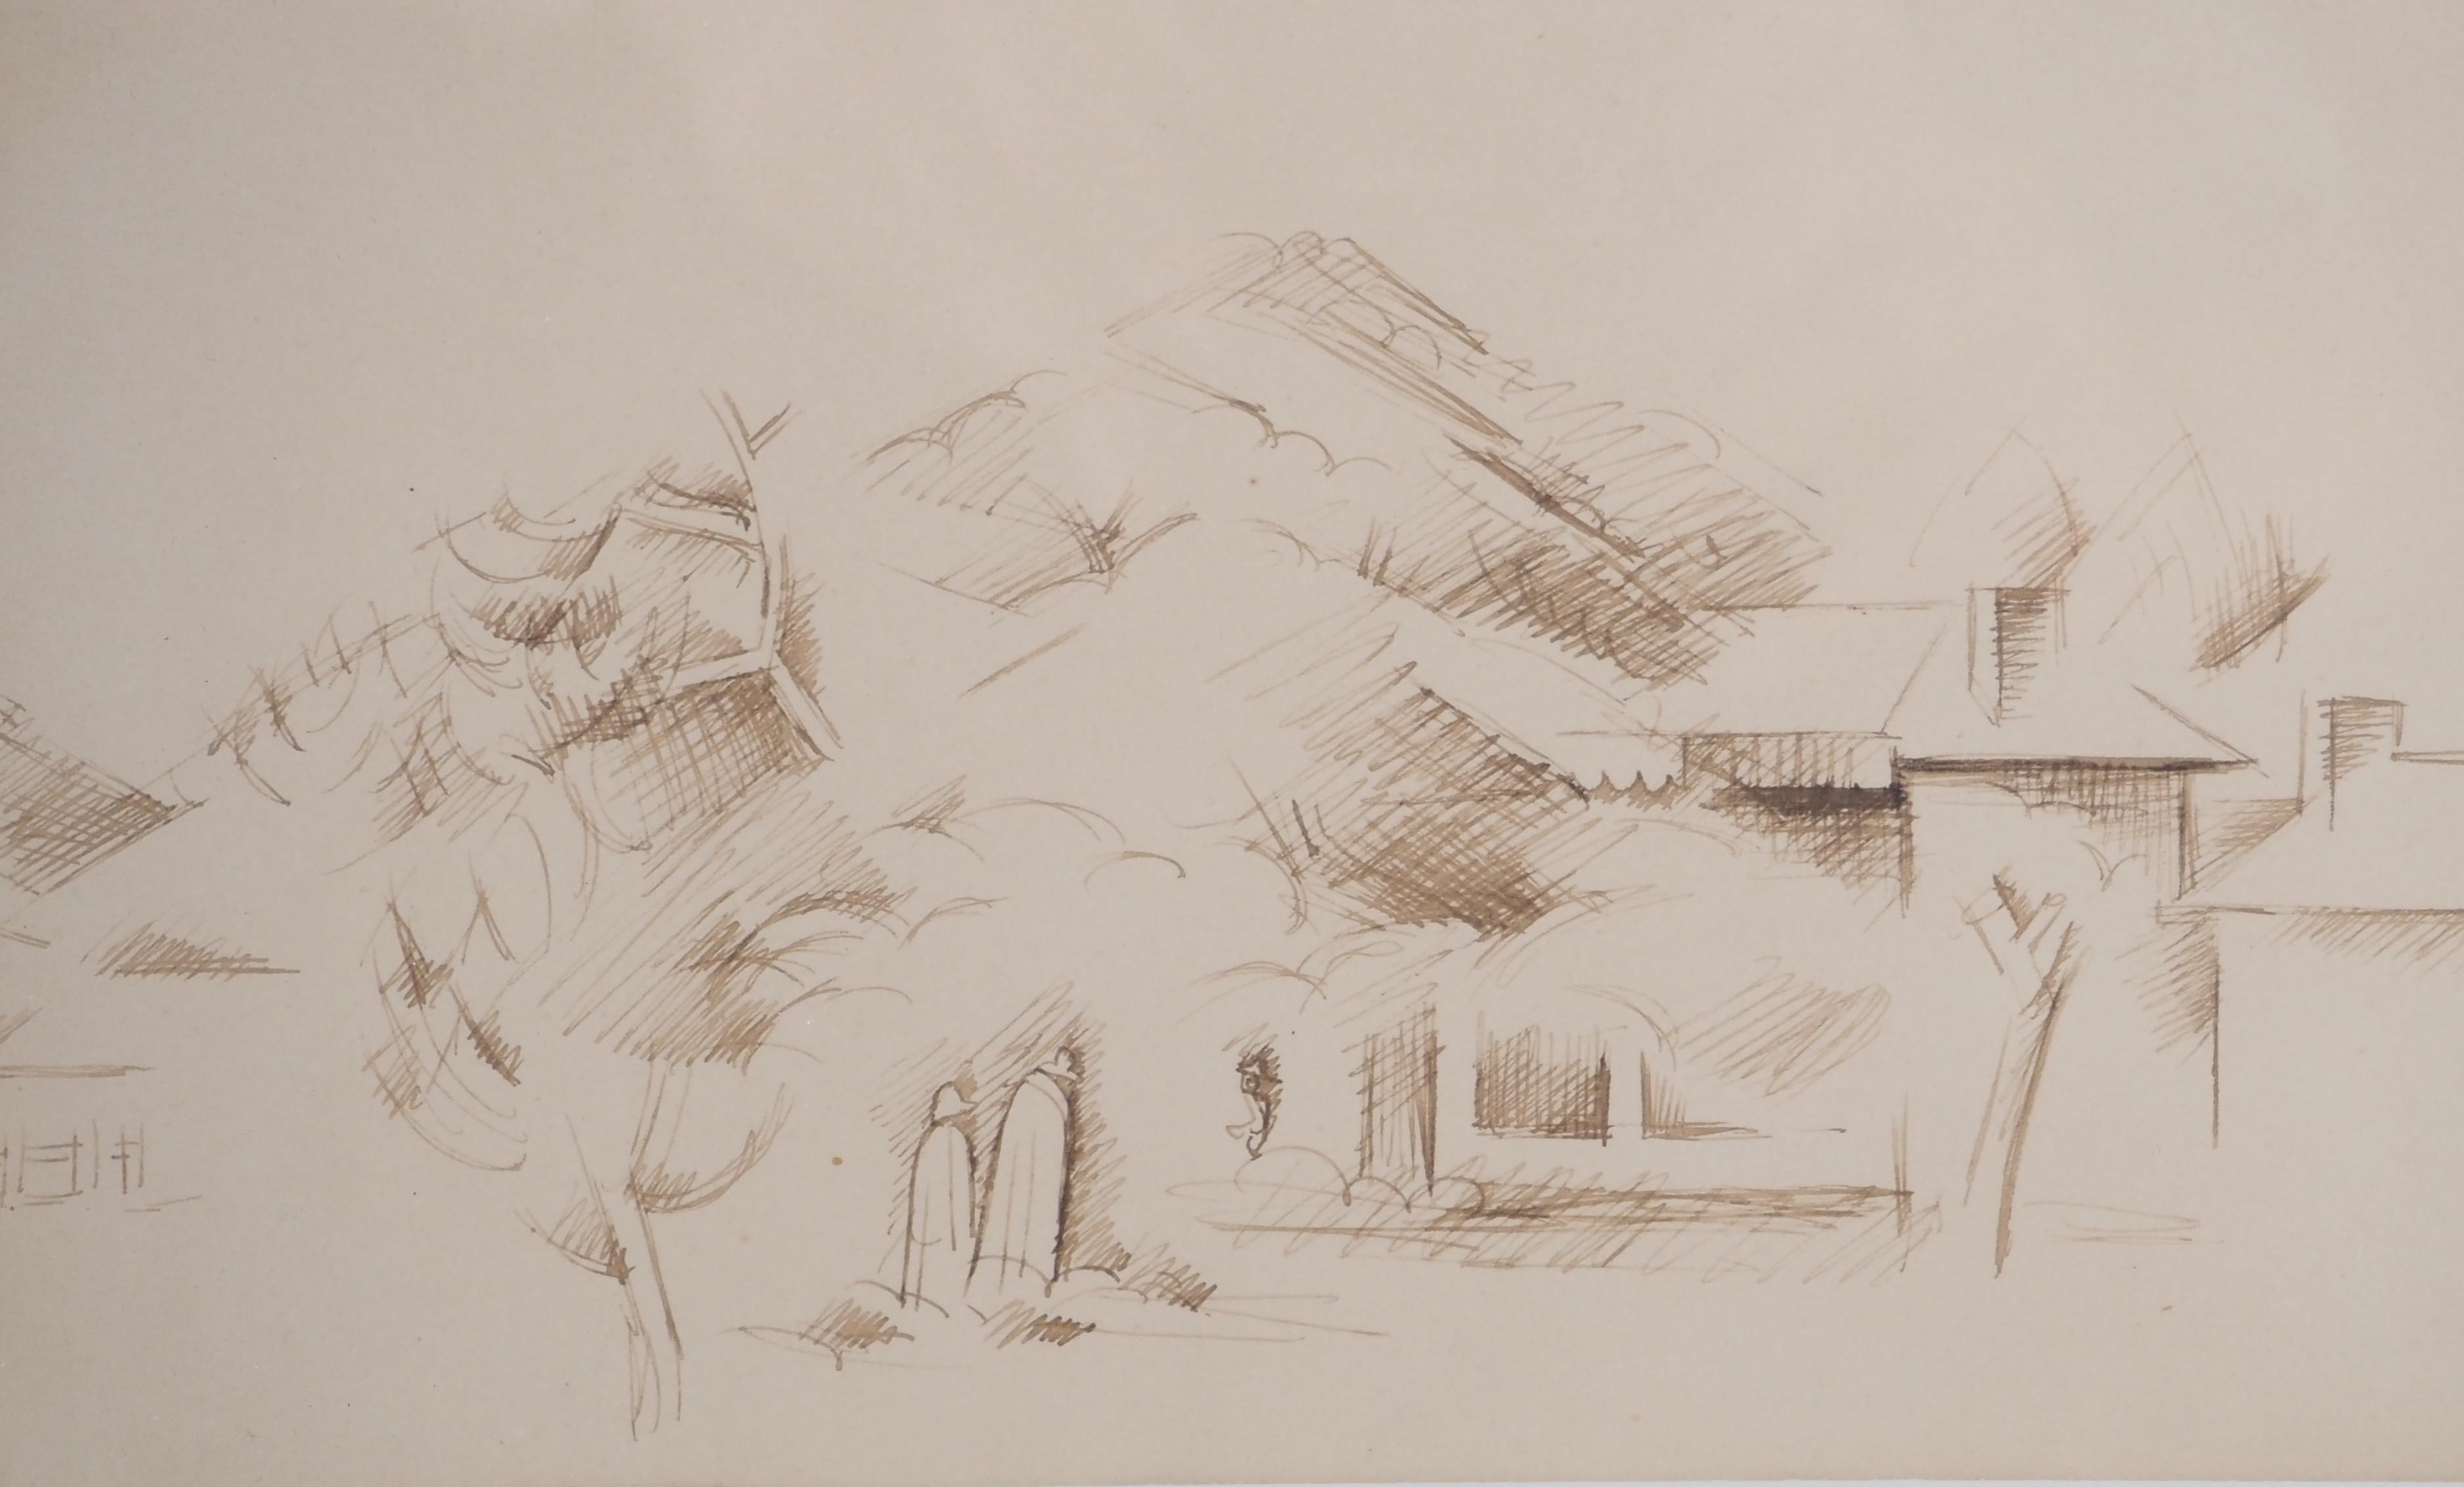 André LHOTE (1885-1962)
Provence: the shepherds' refuge, c. 1925

Original drawing in brown ink
Signed in the bottom right corner
On paper 16 x 26 cm at sight
Presented in a lacquered wood frame 30 x 40 cm

Mrs. Dominique Bermann Martin has kindly